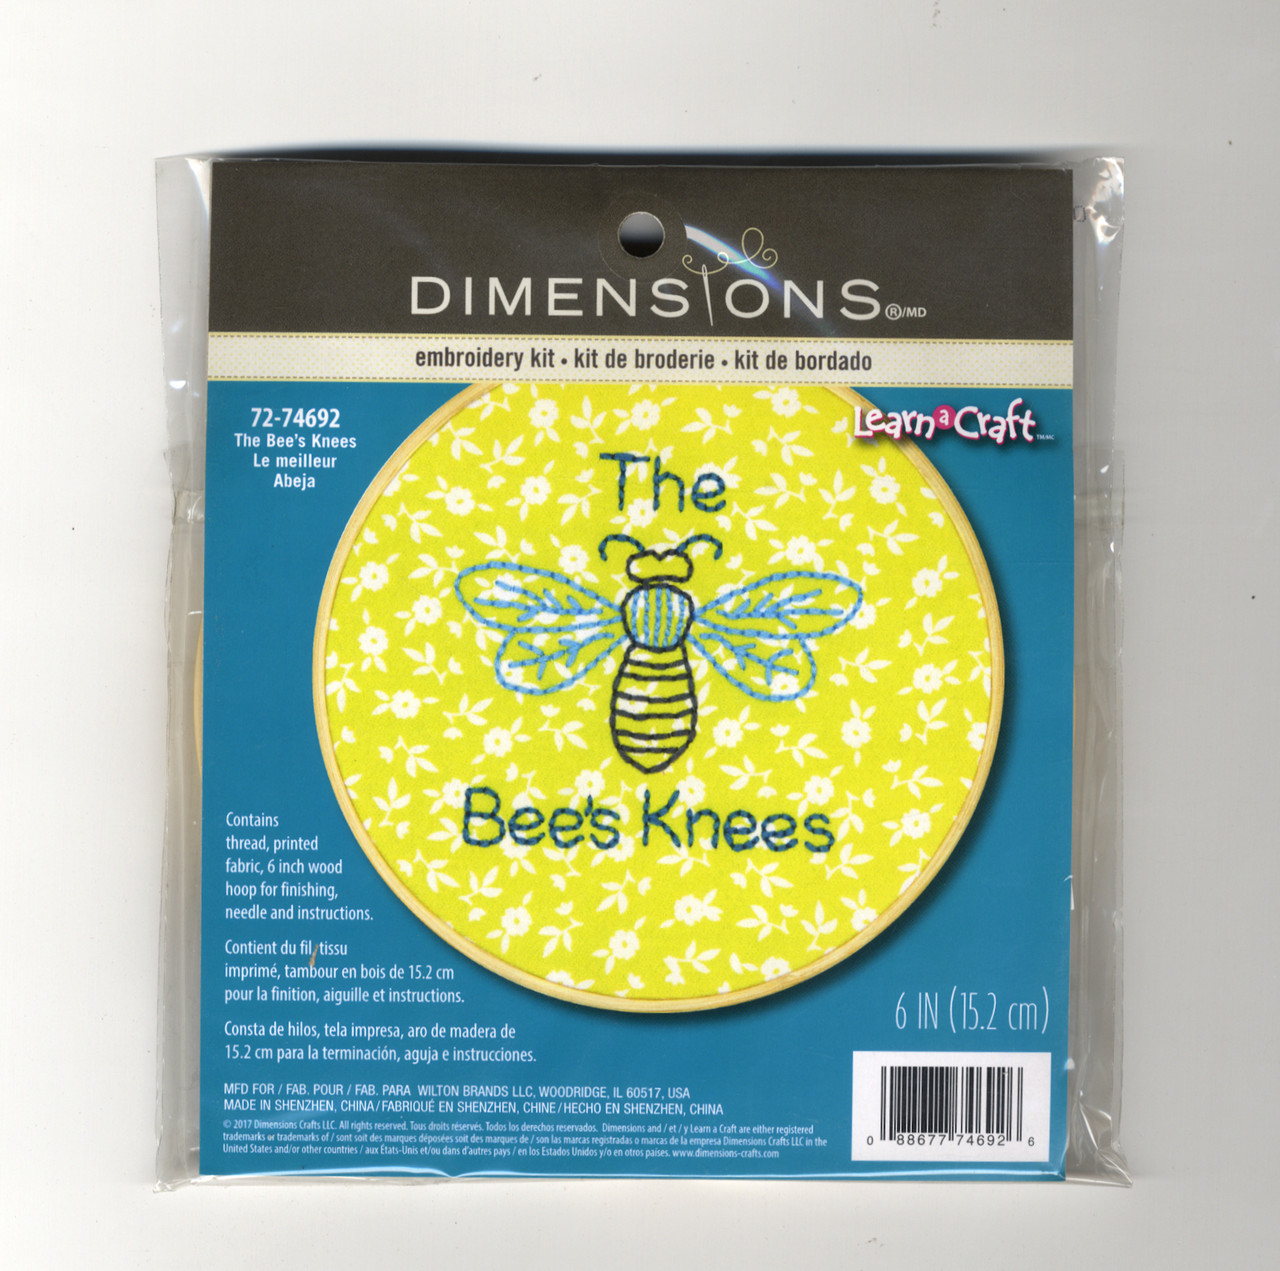 Learn a Craft - The Bee's Knees